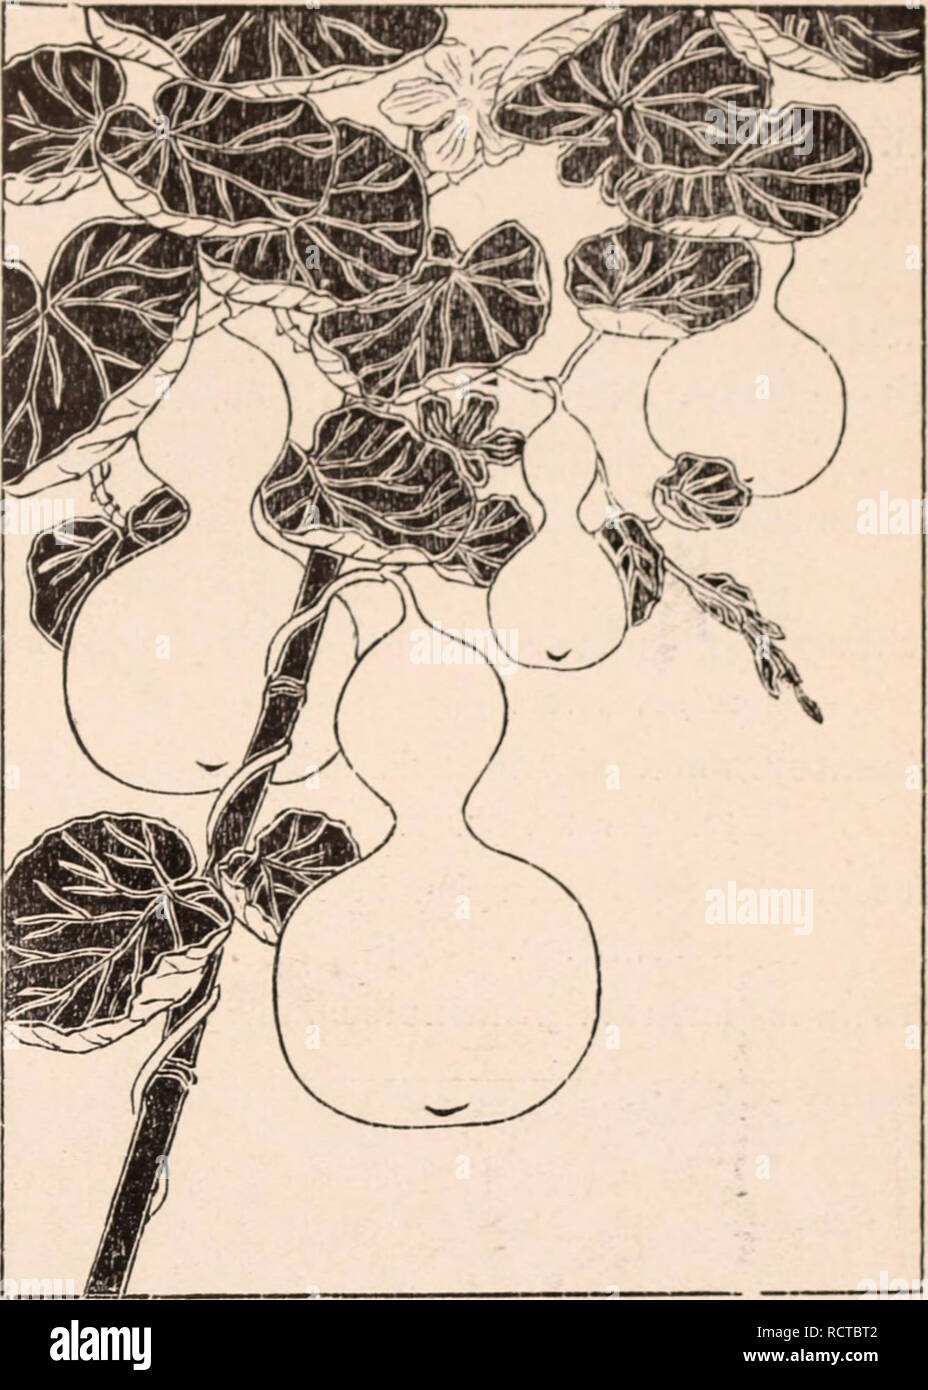 . Descriptive catalogue of flowering, ornamental trees, shrubs, bulbs, herbs, climbers, fruit trees, &amp;c., &amp;c., &amp;c. / for sale by the Yokohama Nursery Co., Limited.. Nursery Catalogue. ^^3 Clematis floricia, fine white double—per lo, Si.50. Clematis florida, fine double violet—per 10, $1.50. Dioscorea liatatas, (Cinnamon vine)— per 10, 50c. Dioscorea sativa, (Cinnamon vine)—per 10, 50c. Dioscorea tenuipes, smaller species—per 10, 50c. Doliclios Lablab, &quot; Daylight,&quot; hardy annual climbing vine, tall quick easy growing; its beautiful white profuse flowers yield edible silvery Stock Photo